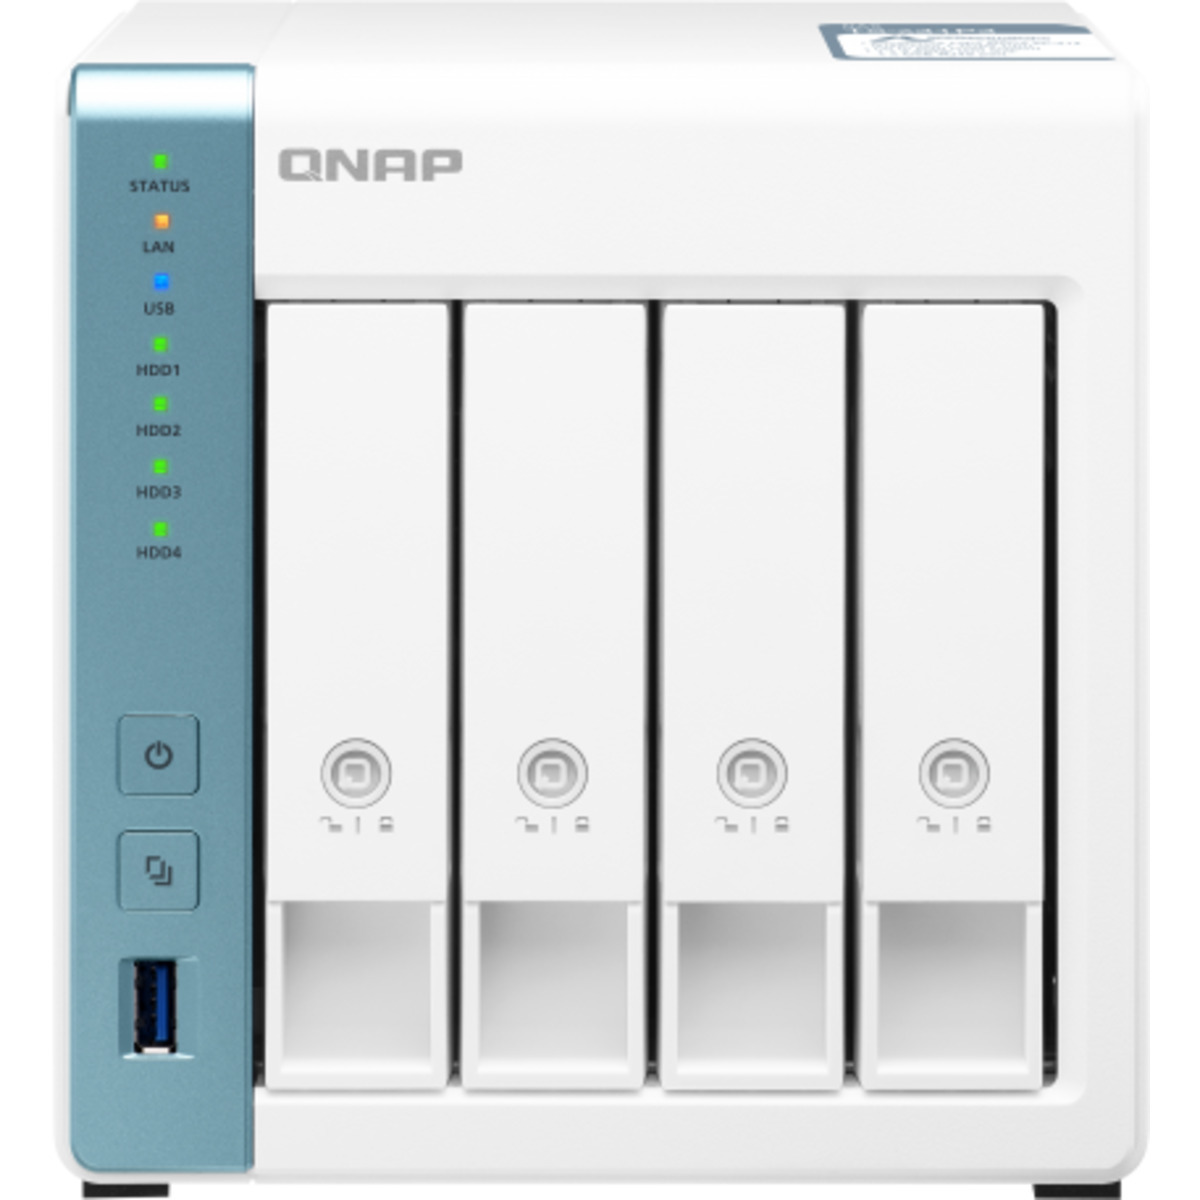 buy $1168 QNAP TS-431P3 24tb Desktop NAS - Network Attached Storage Device 4x6000gb Western Digital Blue WD60EZAZ 3.5 5400rpm SATA 6Gb/s HDD CONSUMER Class Drives Installed - Burn-In Tested - FREE RAM UPGRADE - nas headquarters buy network attached storage server device das new raid-5 free shipping usa christmas new year holiday sale TS-431P3